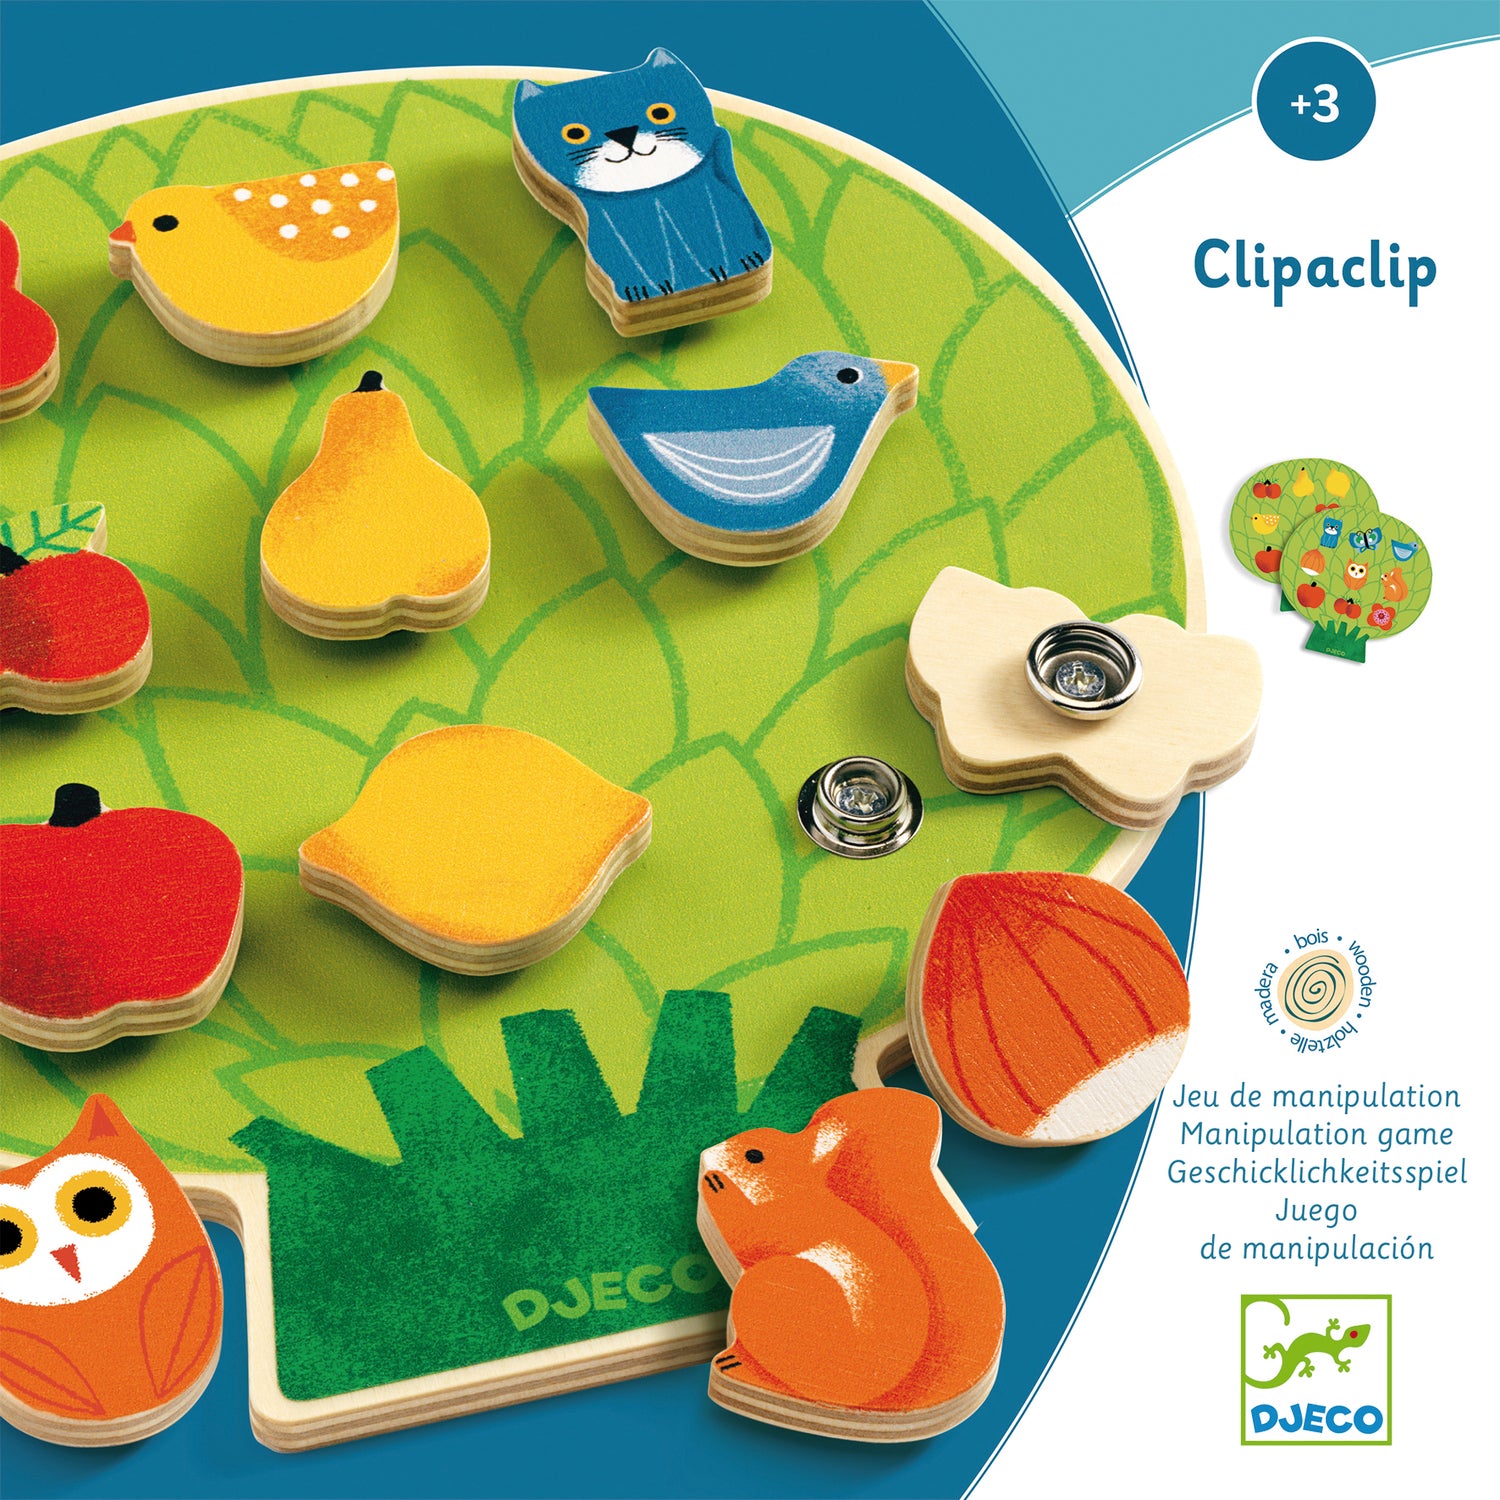 Clipaclip Learn to SnapTree